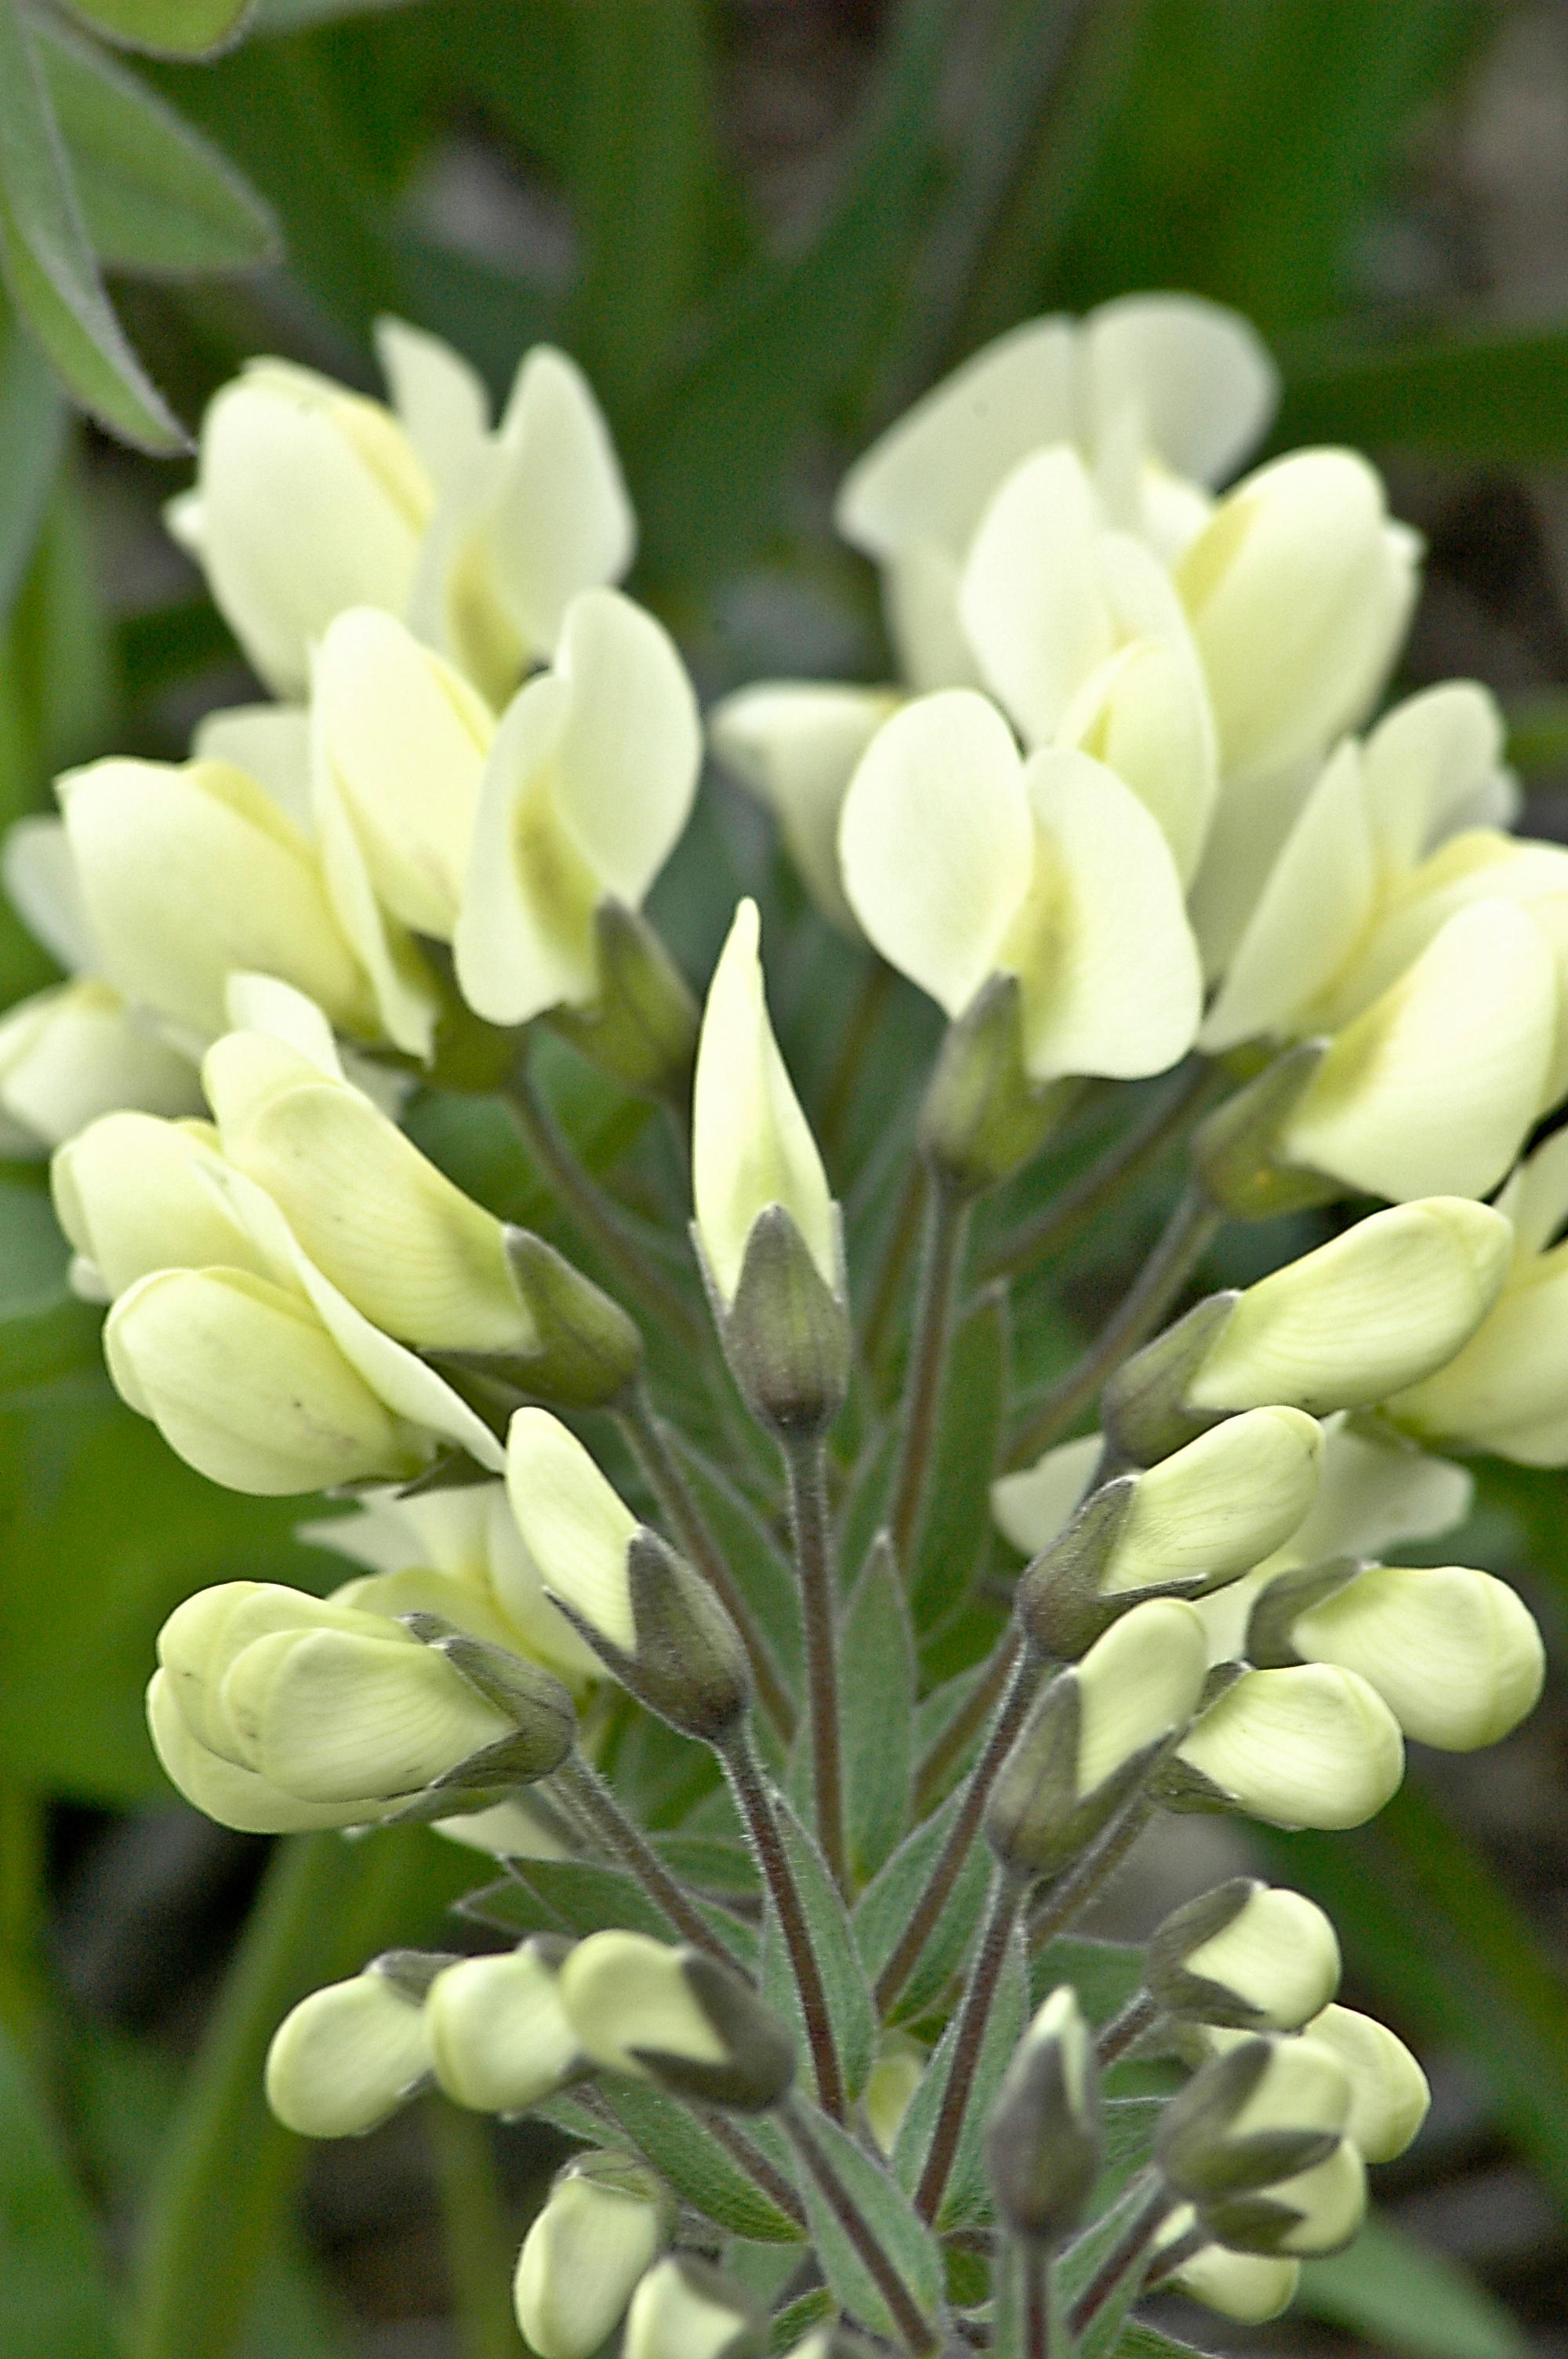 Light-yellow flowers with buds, white hair,  Olive sepals, stems and leaves.